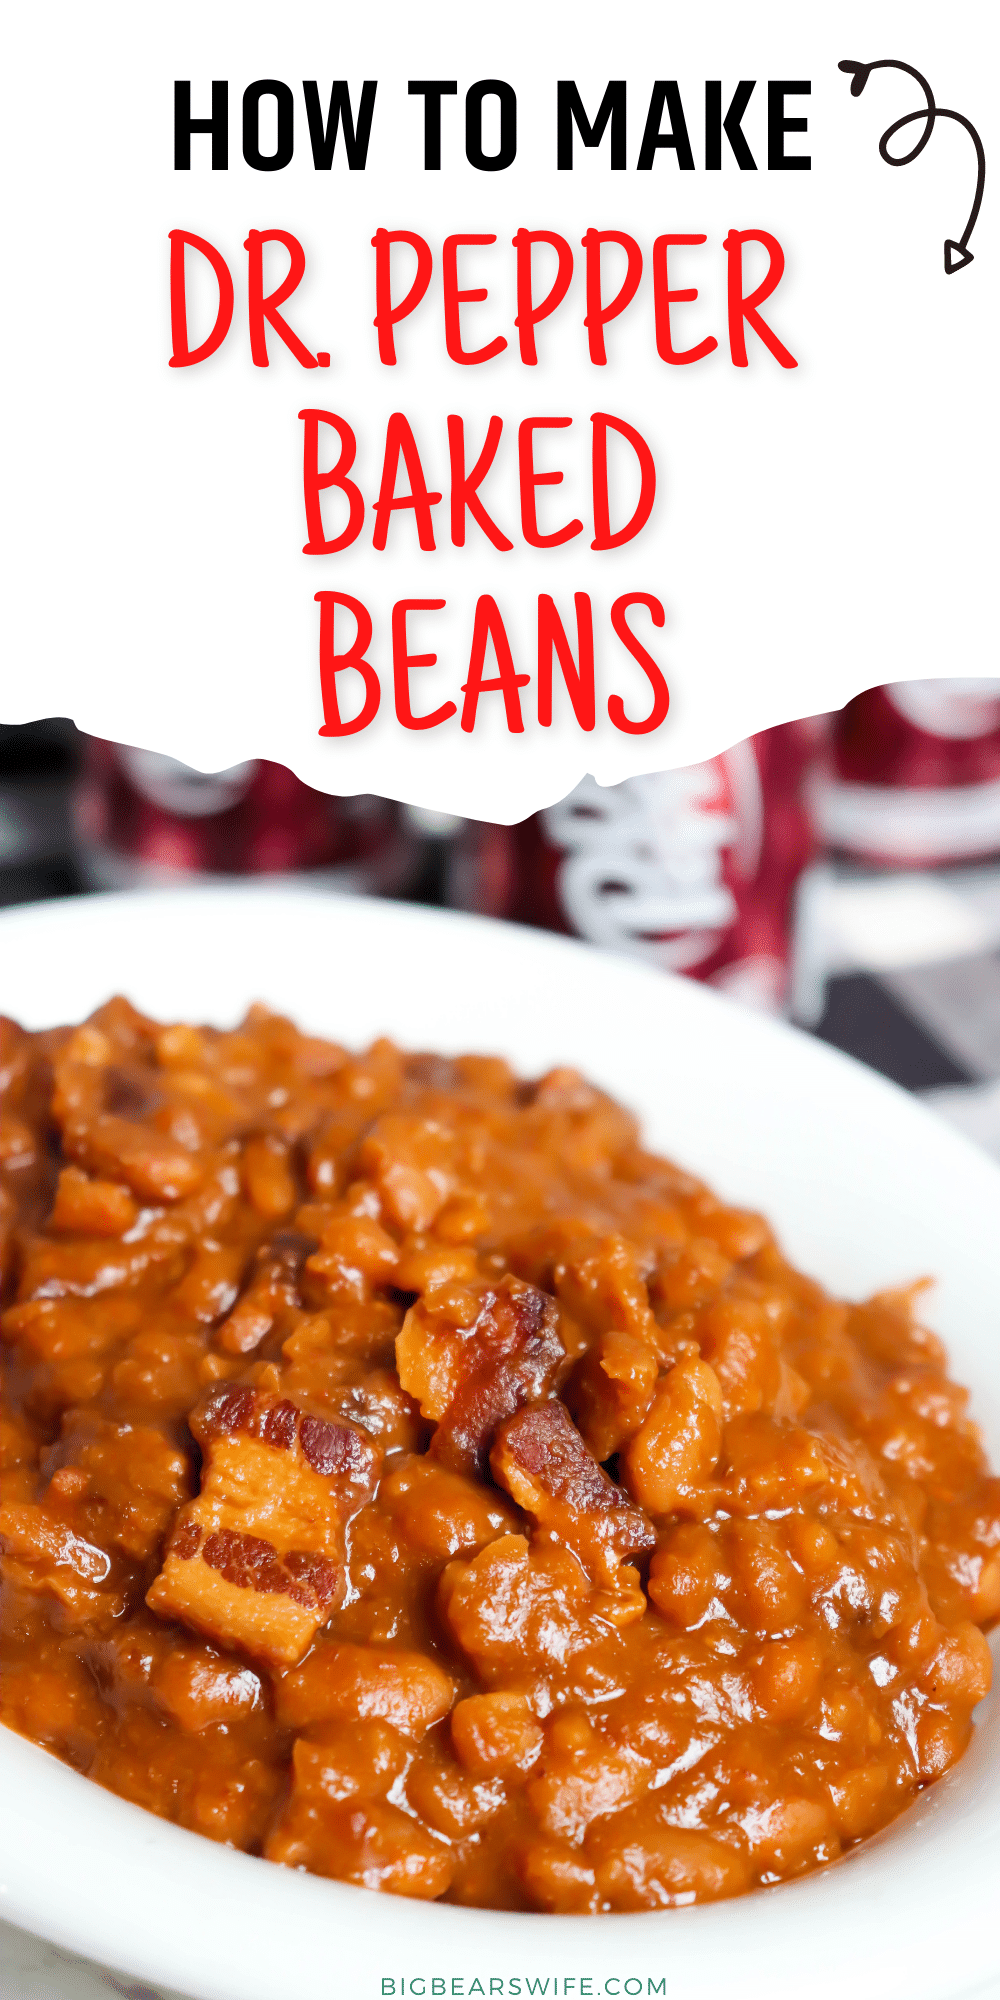 Dr. Pepper Baked Beans - delicious homemade baked beans with molasses, brown sugar, bacon and Dr. Pepper! Perfect side dishes for dinner, cookouts and holidays.   via @bigbearswife